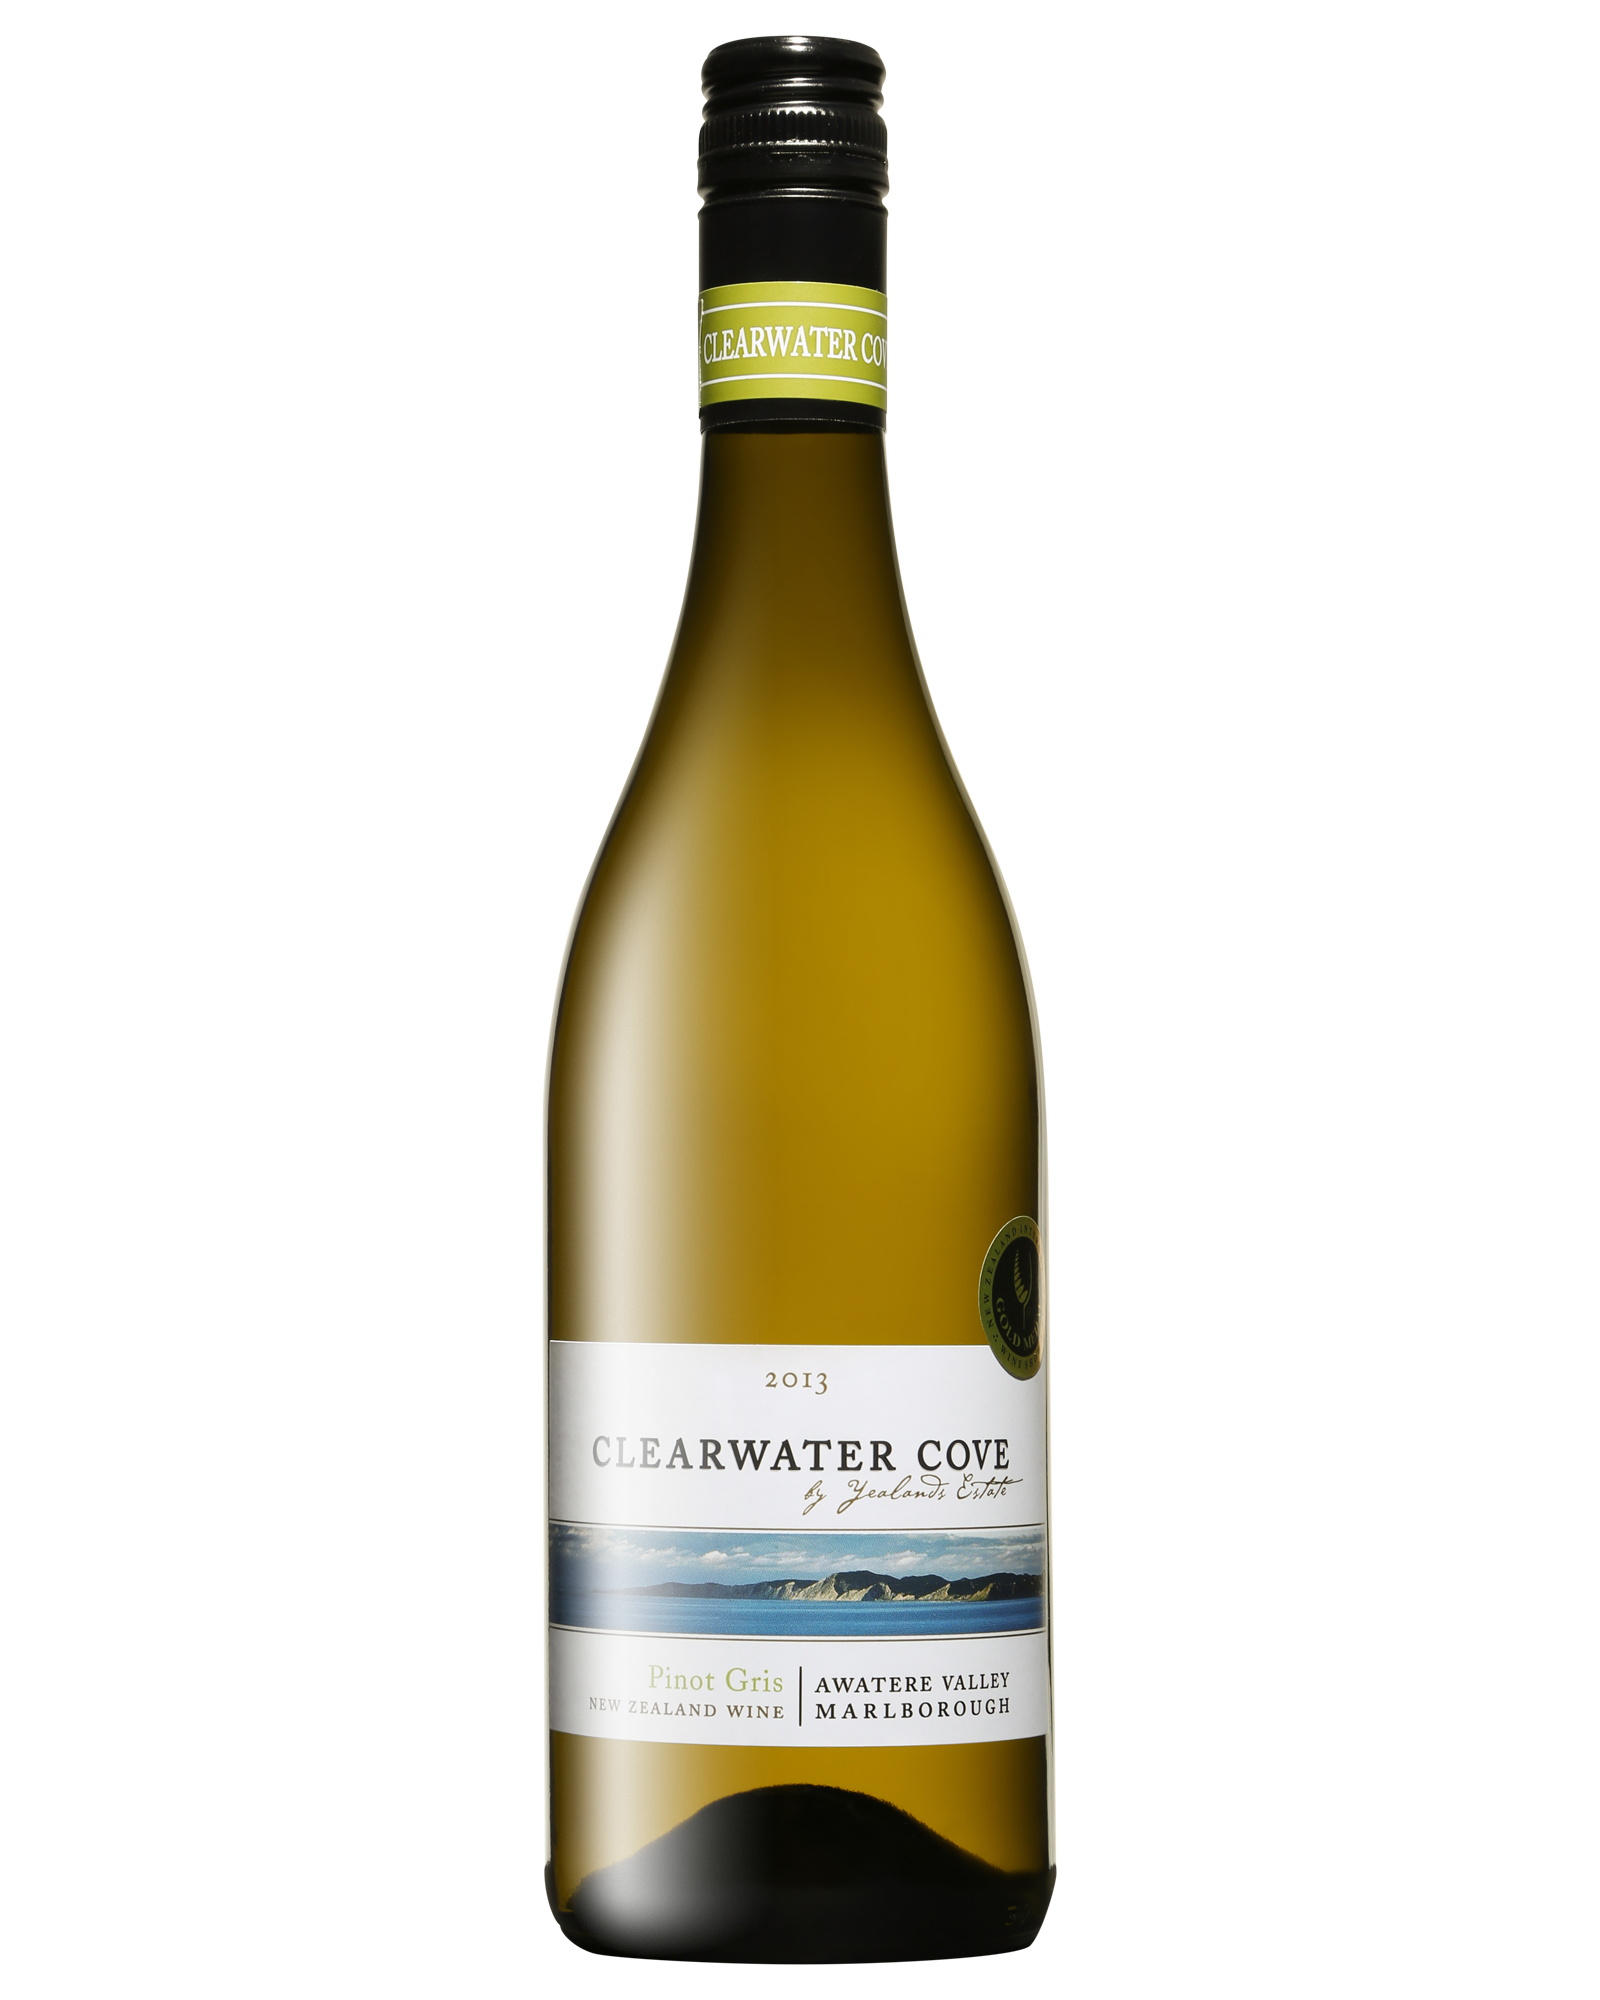 Clearwater Cove Marlborough Pinot Gris 2014